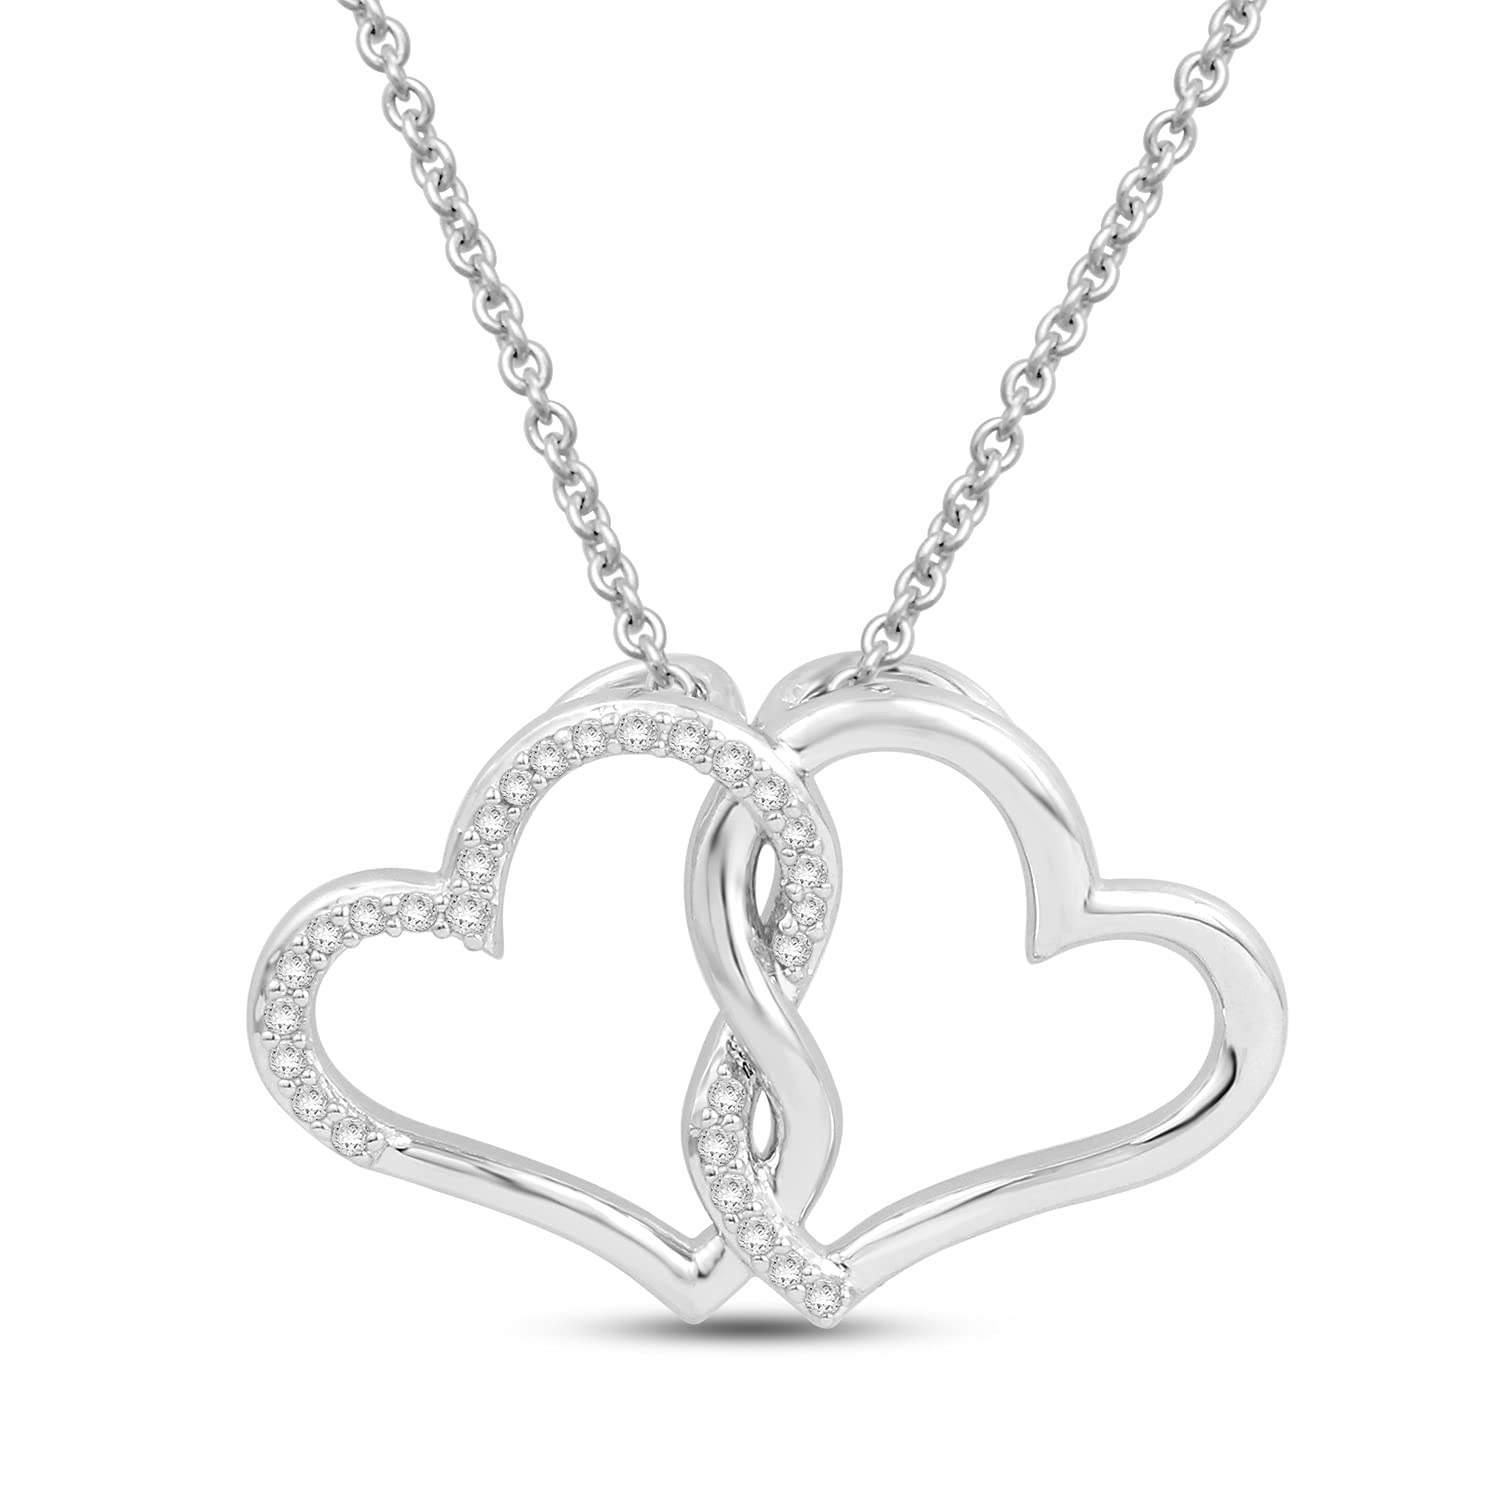 Jewelili Intertwined Double Heart Pendant Necklace with Natural